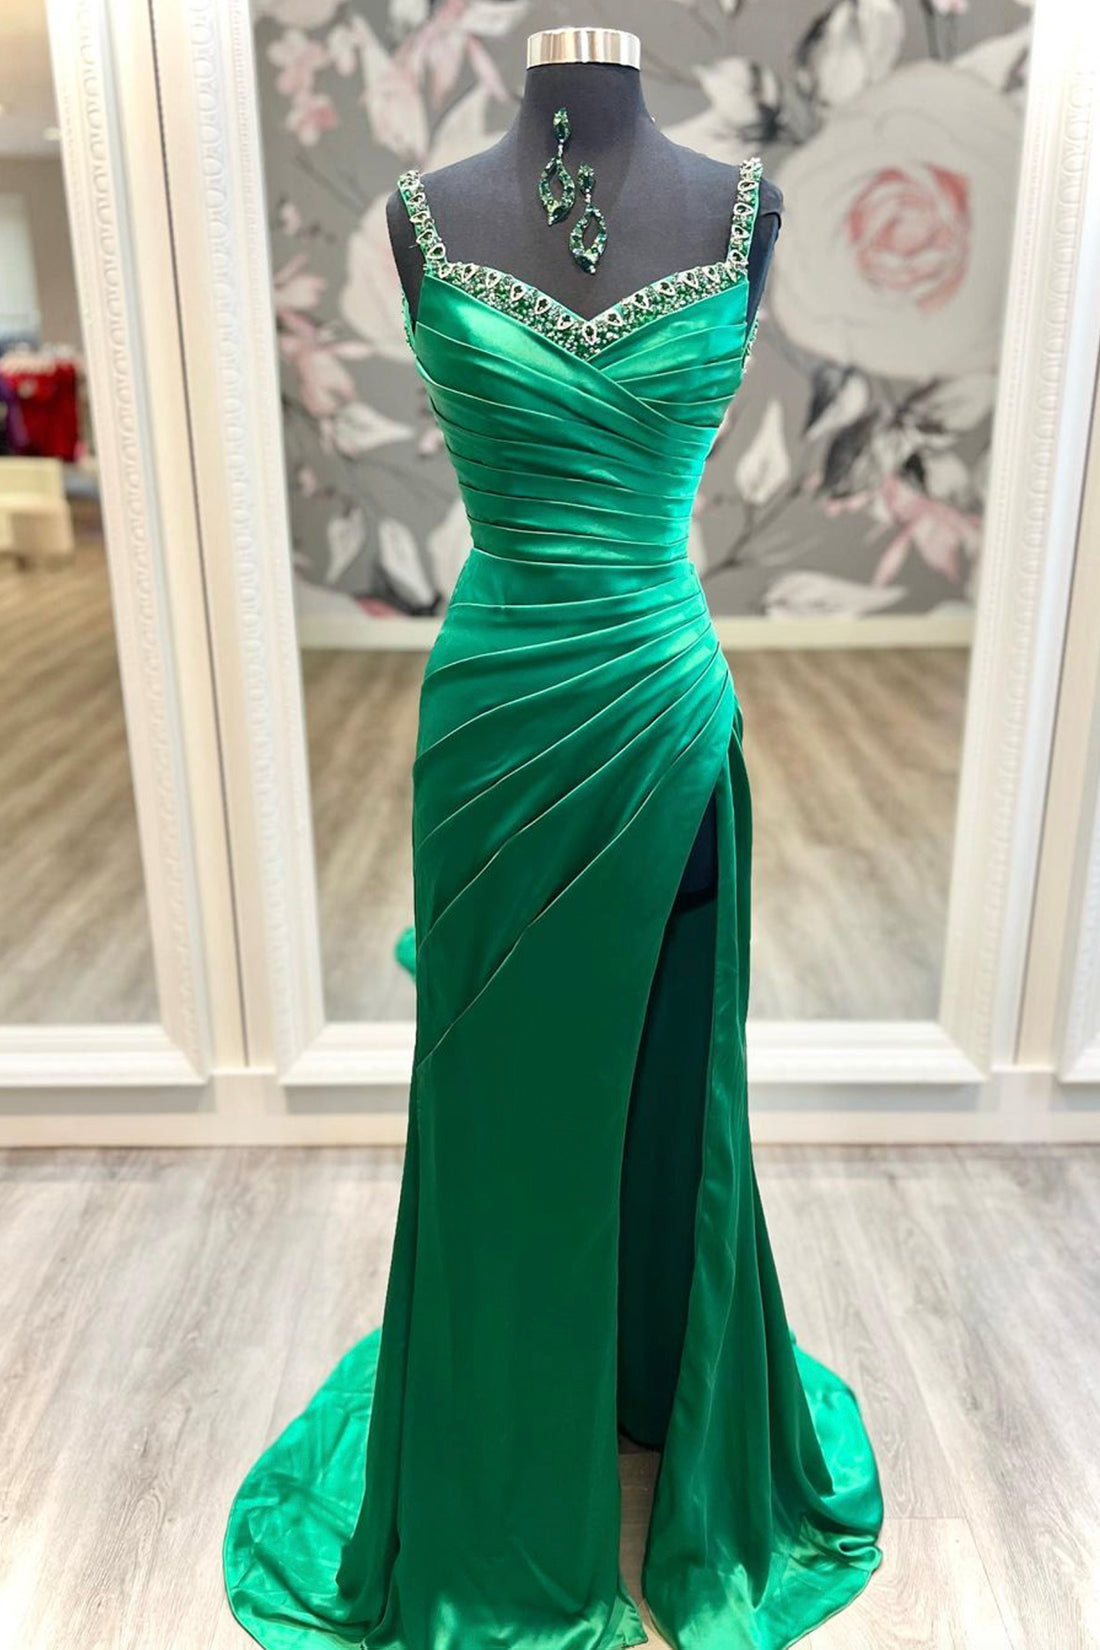 Mermaid Satin Long Prom Dress Outfits For Girls, Green Satin Evening Dress Outfits For Women with Beaded